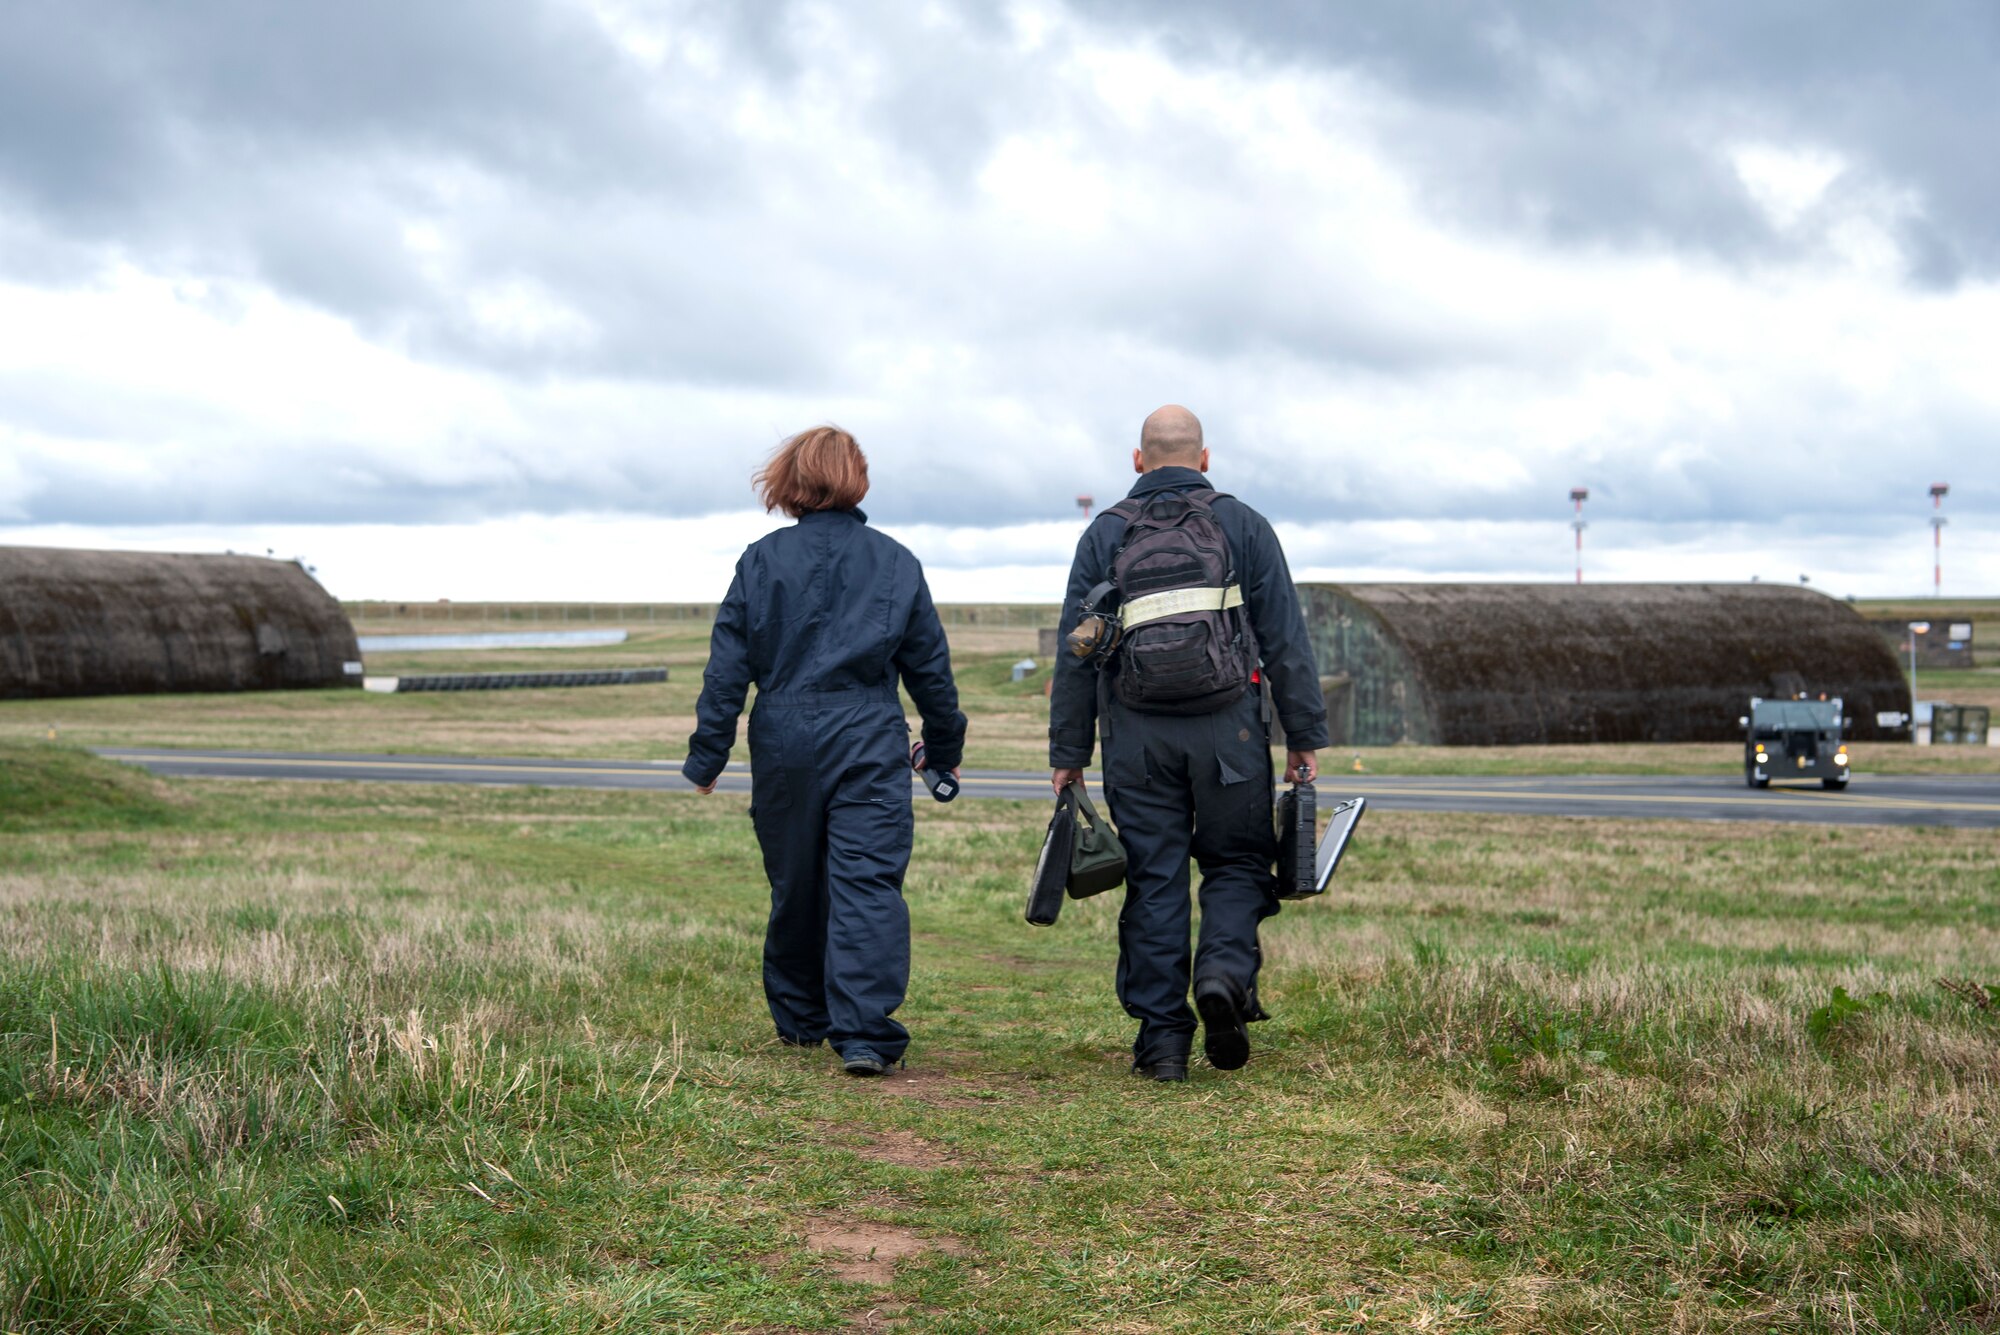 U.S. Air Force Staff Sgt. Stephanie Gillie, 52nd Security Forces Squadron investigator, left, and Senior Airman Jose Pagan, 52nd Aircraft Maintenance Squadron assistant dedicated crew chief, right, walk to the flightline at Spangdahlem Air Base, Germany, April 3, 2019. Gillie shadowed Pagan as part of the 52nd AMXS Crew Chief for a Day program. (U.S. Air Force photo by Airman 1st Class Valerie Seelye)